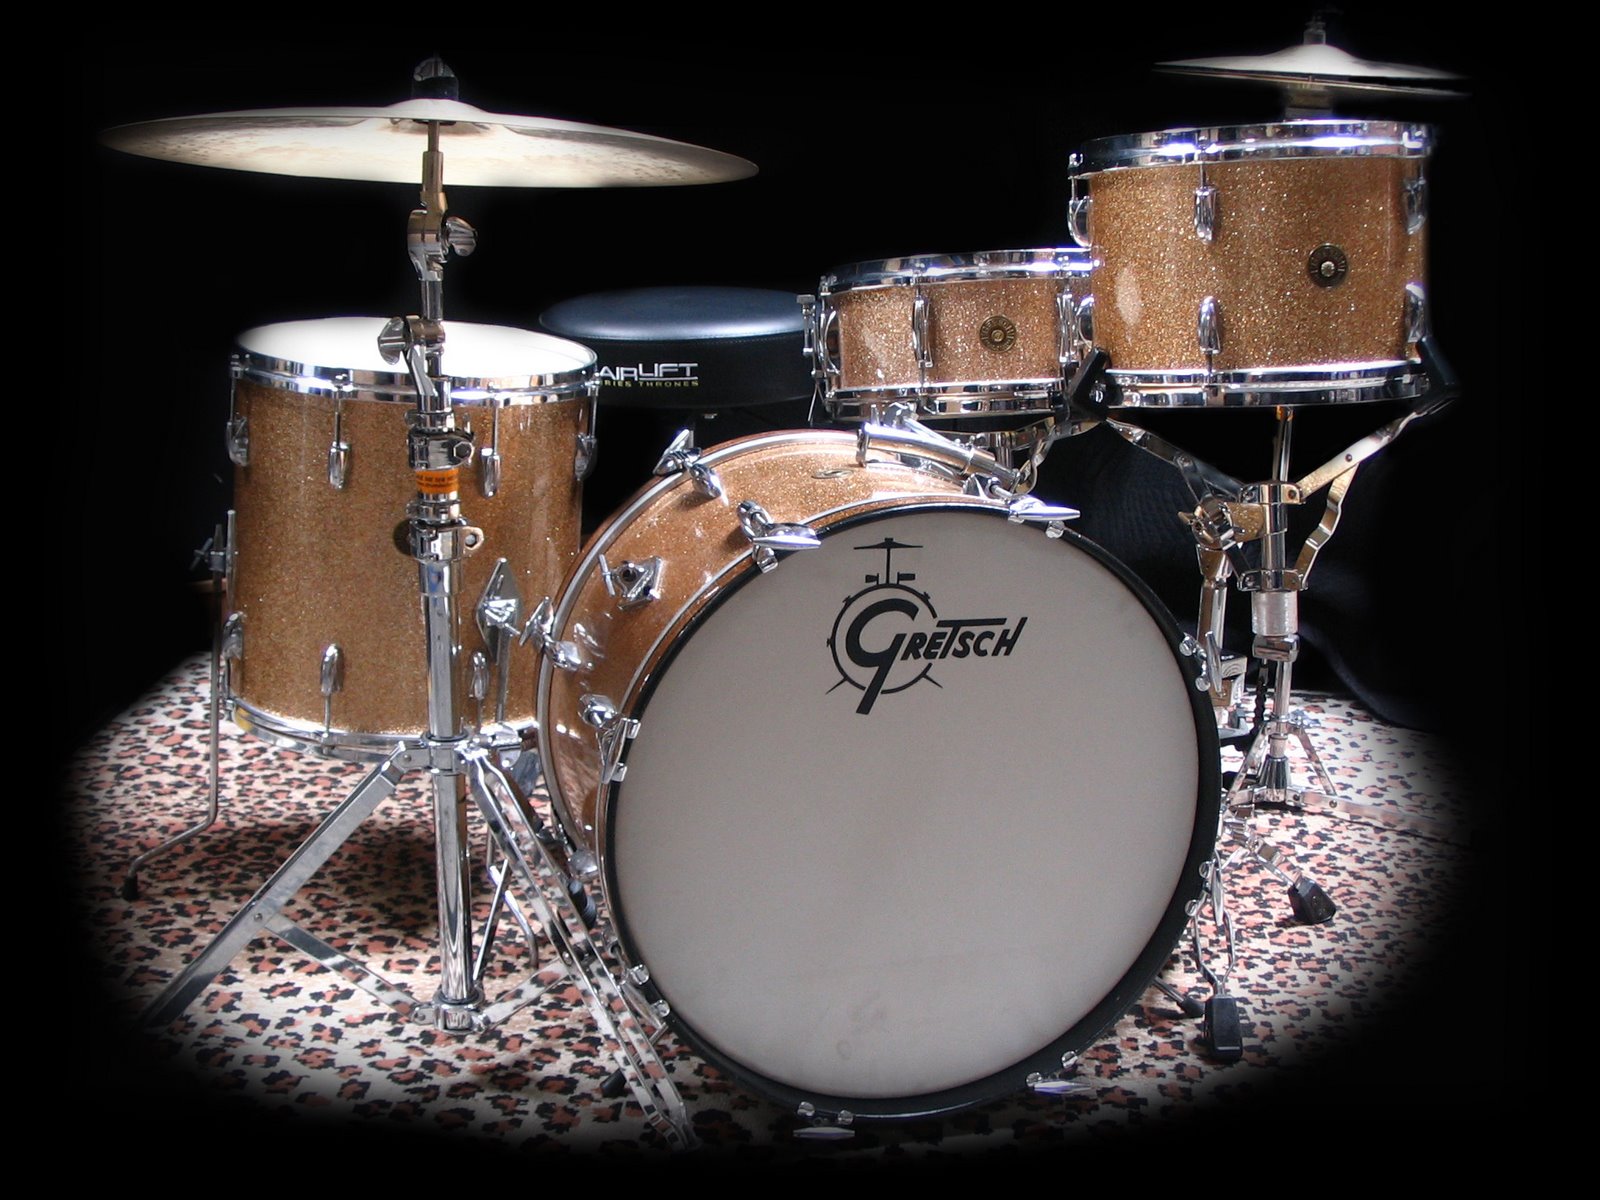 Gretsch Drums Wallpaper Hd Drums thats how i roll